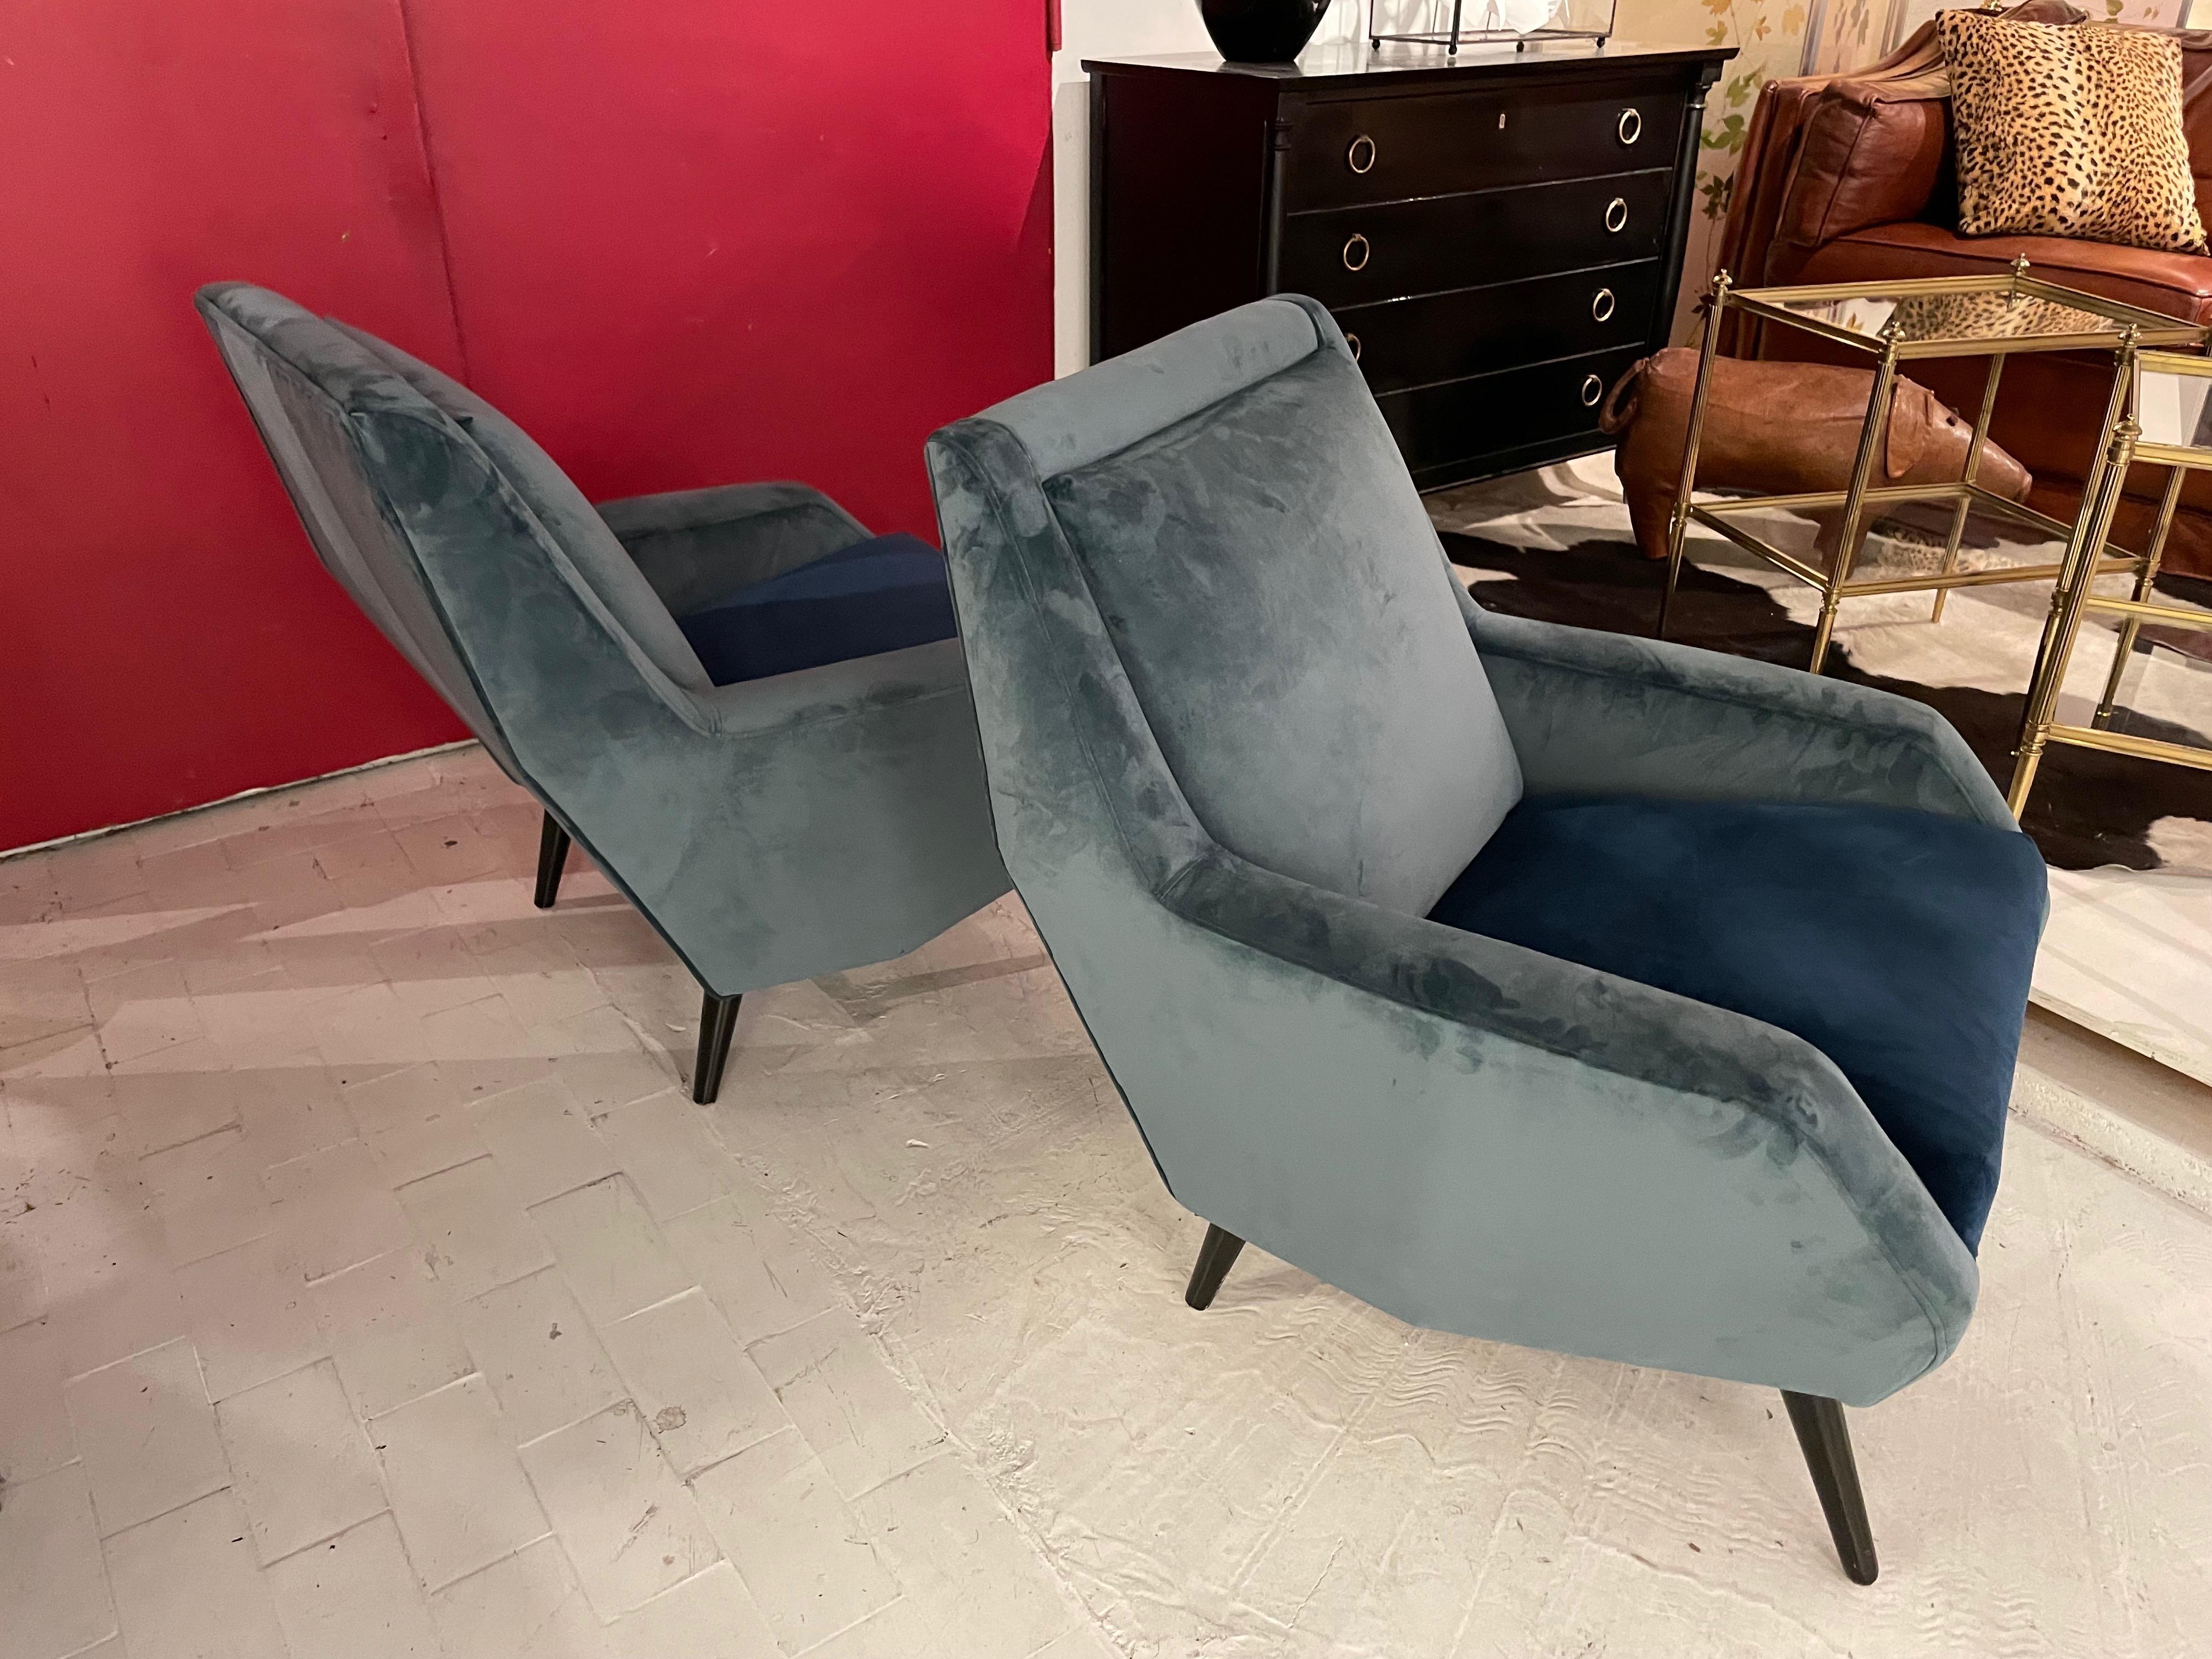 Mid-Century Modern Pair of Carlo de Carli Armchairs With Velvet Upholstery for Cassina, Italy 1954.